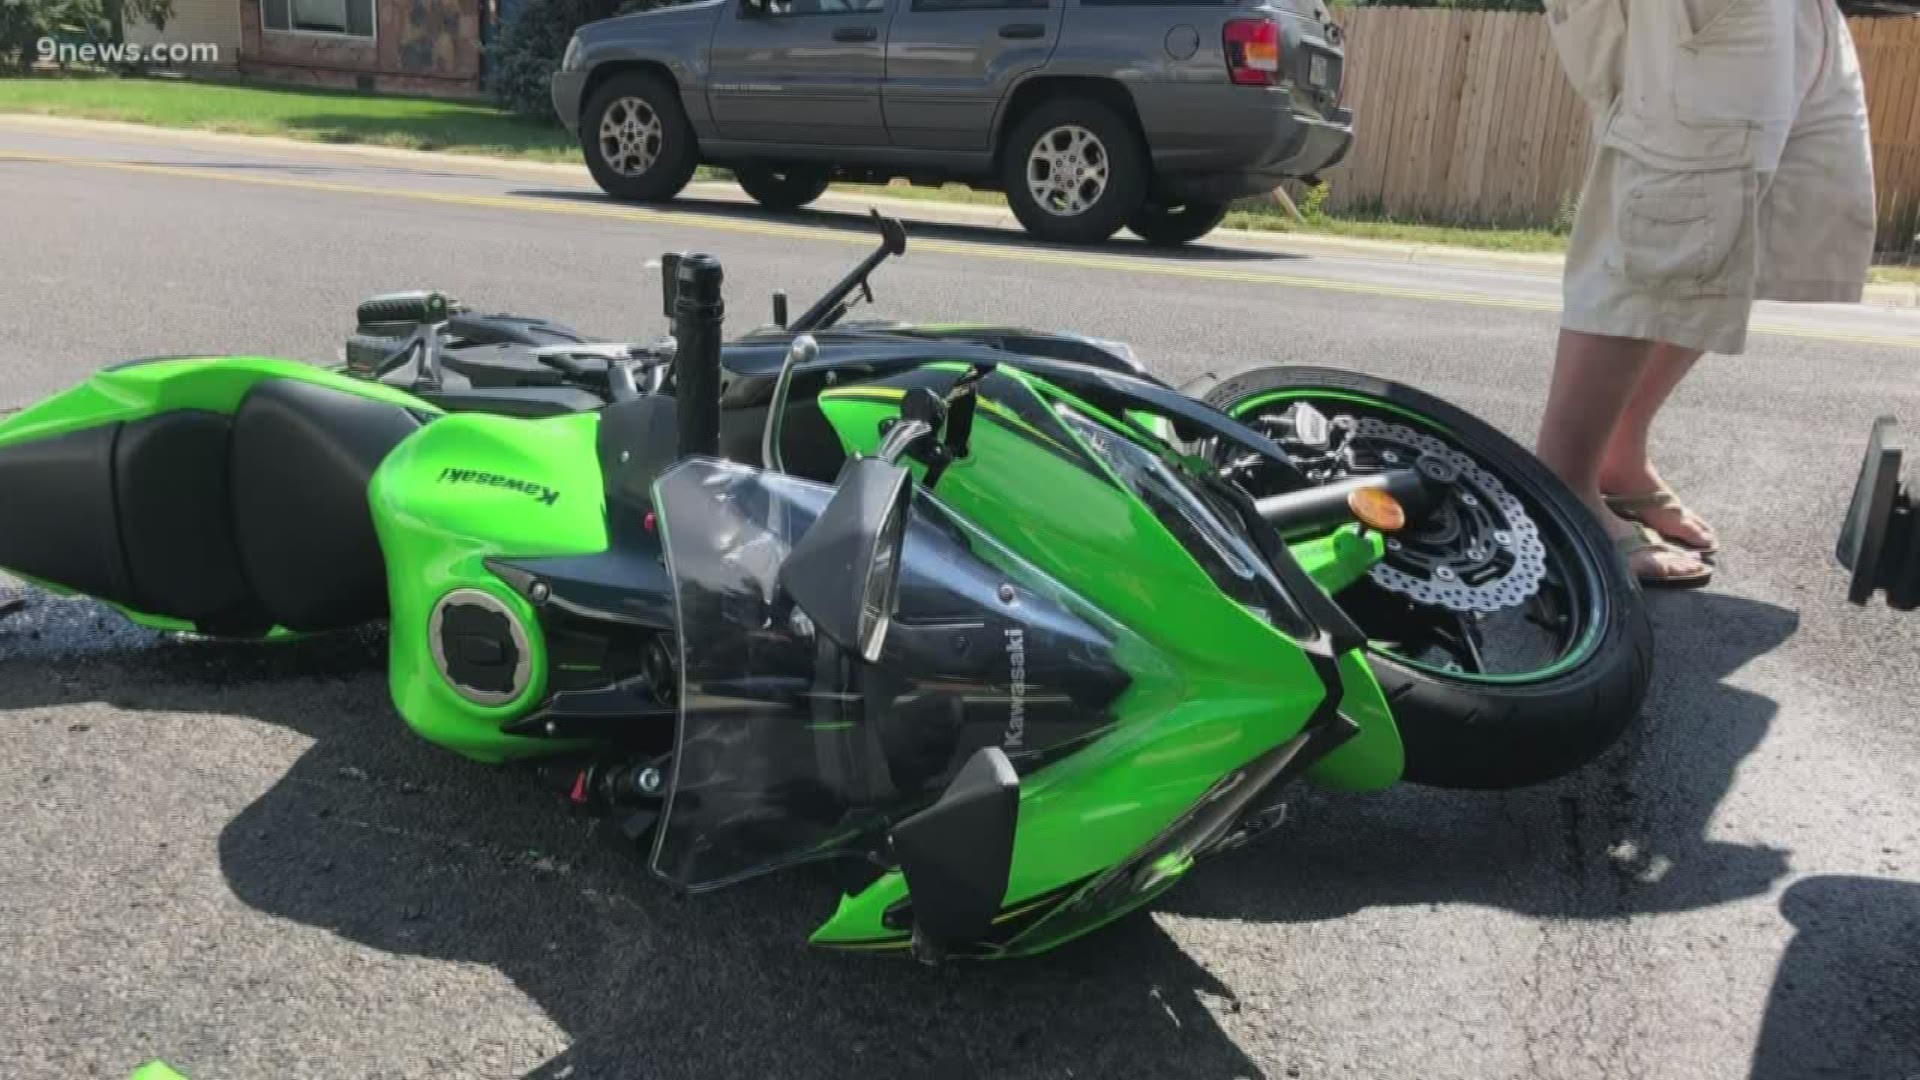 A man hit from behind and thrown from his motorcycle in Arvada this week is grateful the accident wasn't much worse. Now, he's warning others - texting while driving could cost a life.